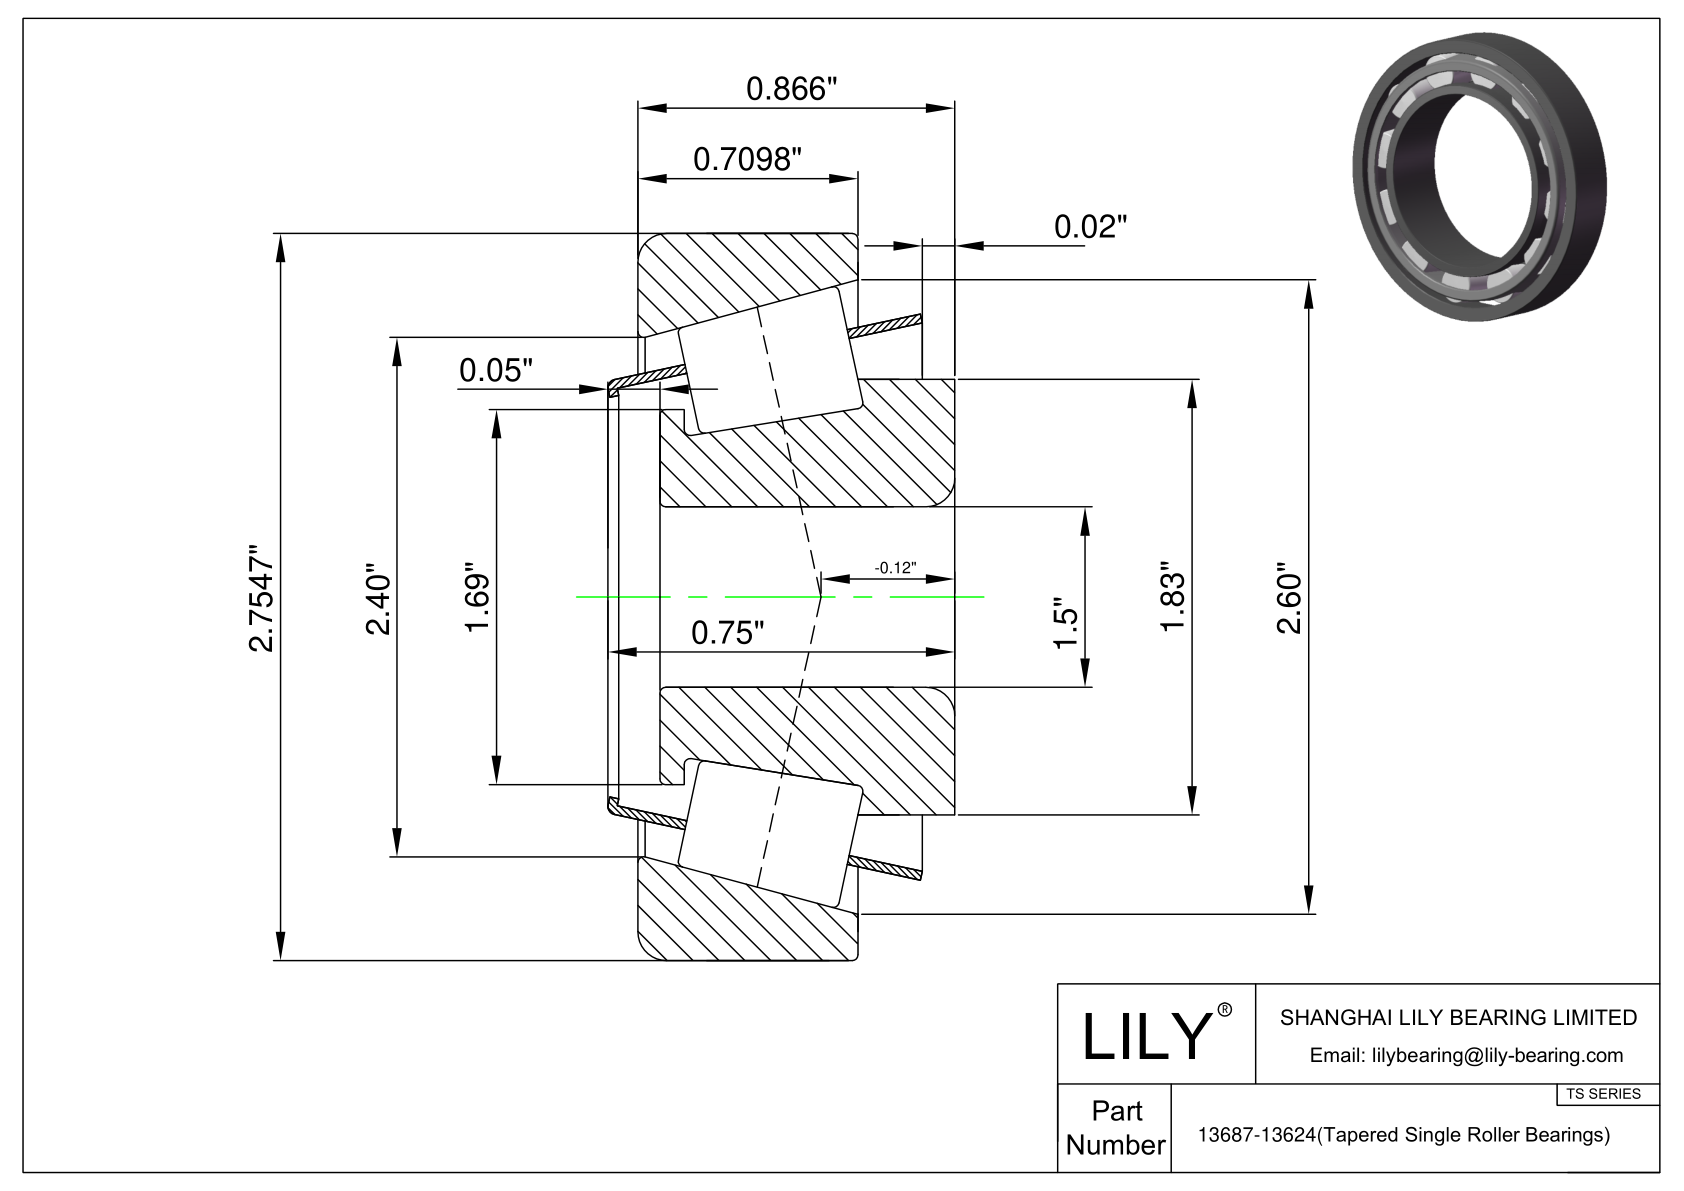 13687-13624 TS (Tapered Single Roller Bearings) (Imperial) cad drawing